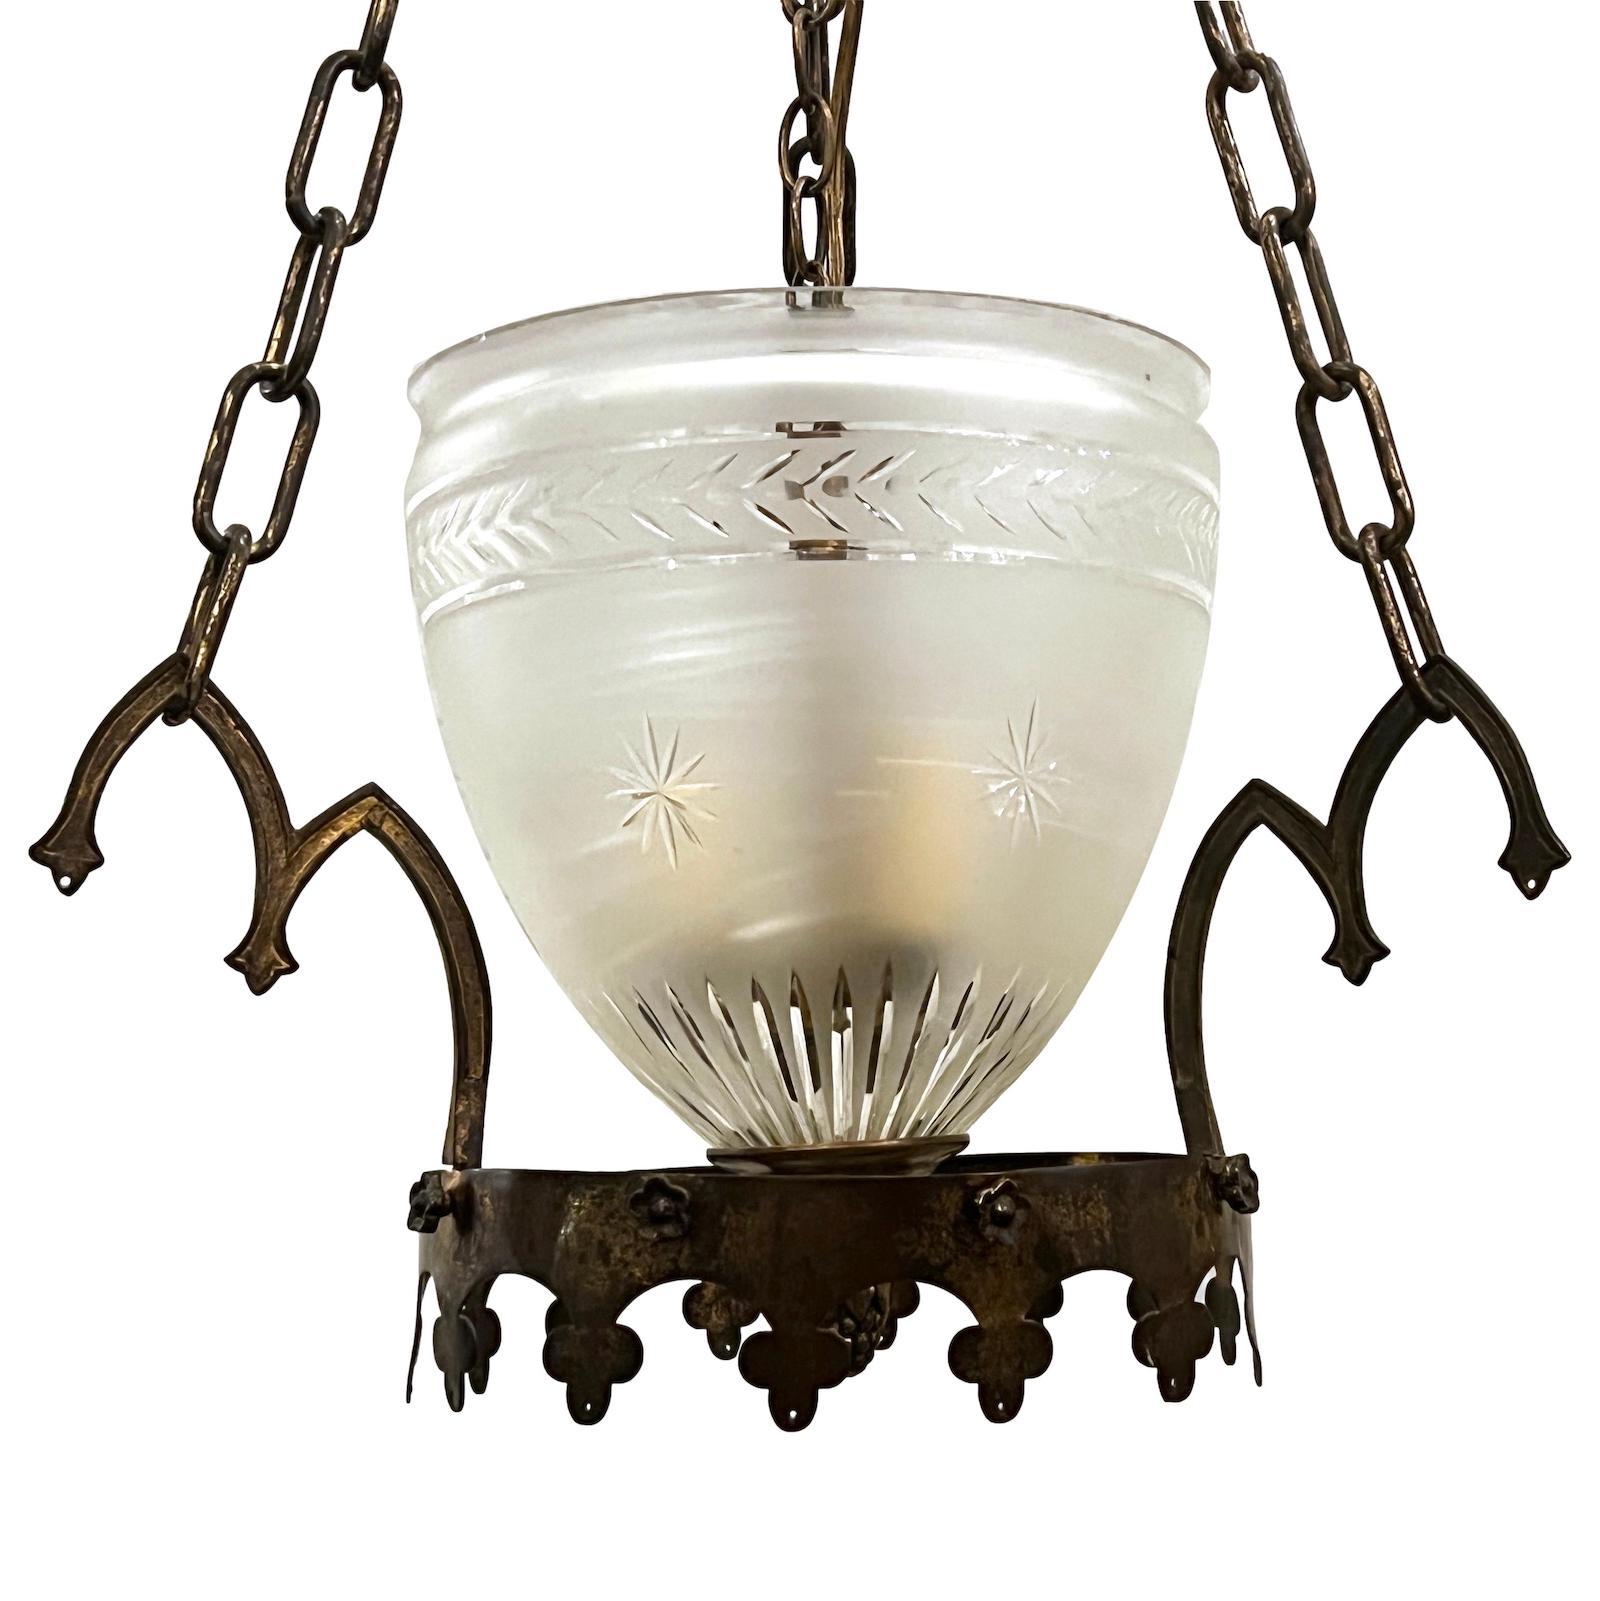 A late 19th Century English gilt metal lantern with etched glass and three interior lights.

Measurements:
Drop: 25.5